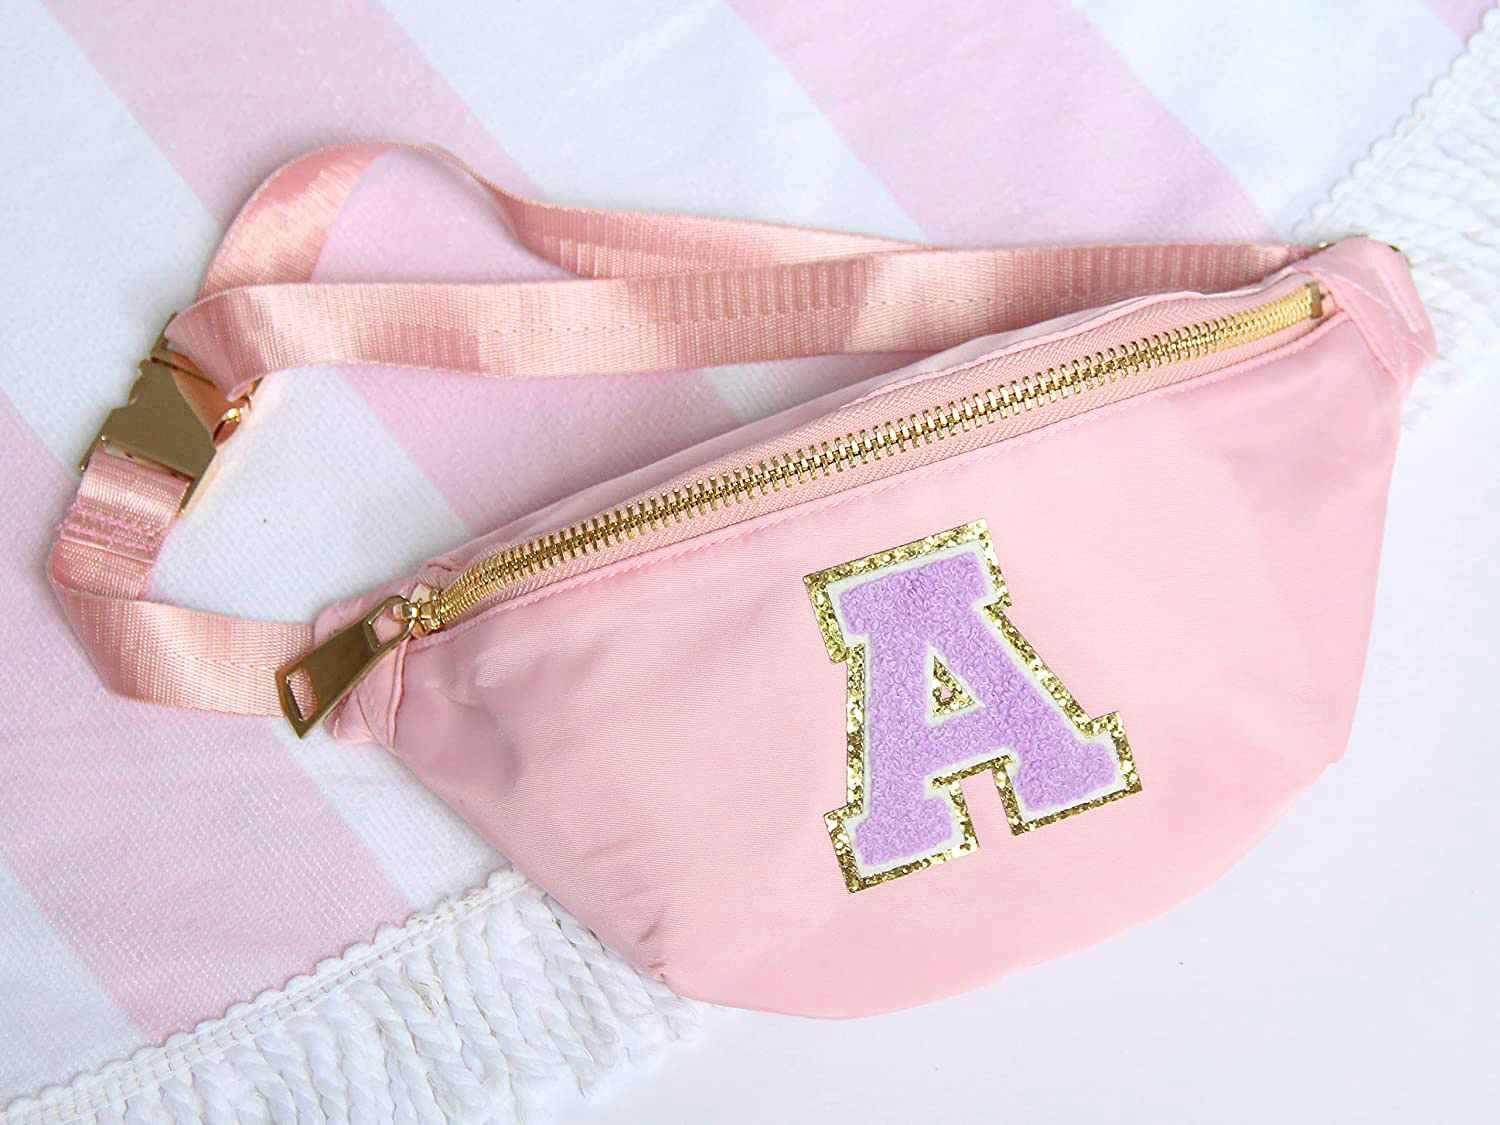 A pink fanny pack with the varsity letter "A" on the front.